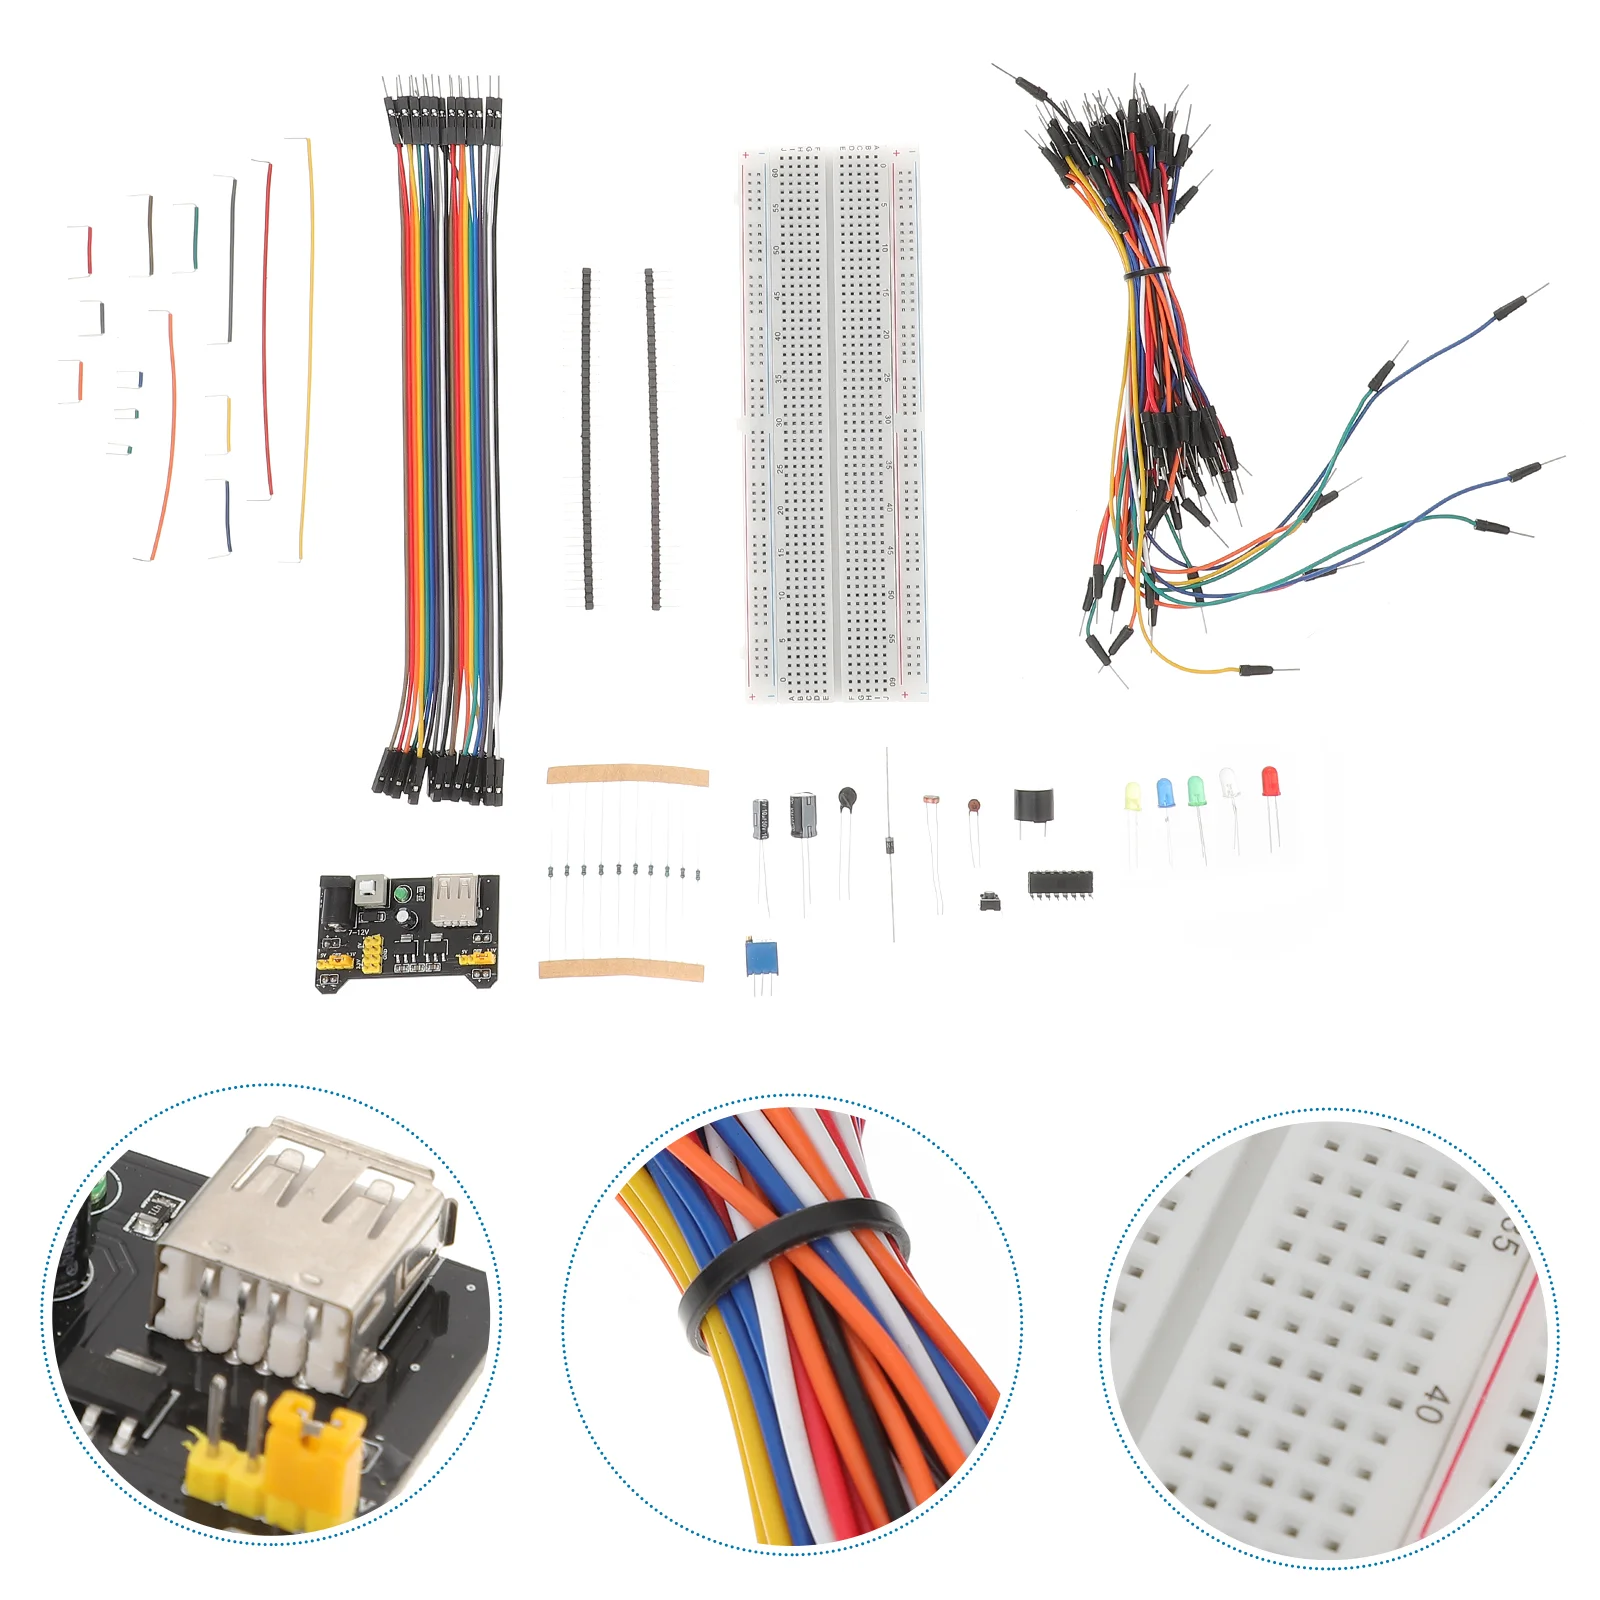 

Drawer Kit R3 Element Breadboard Prototyping Circuit Starter Suite Tie-points Electronic Component Jumper Wires